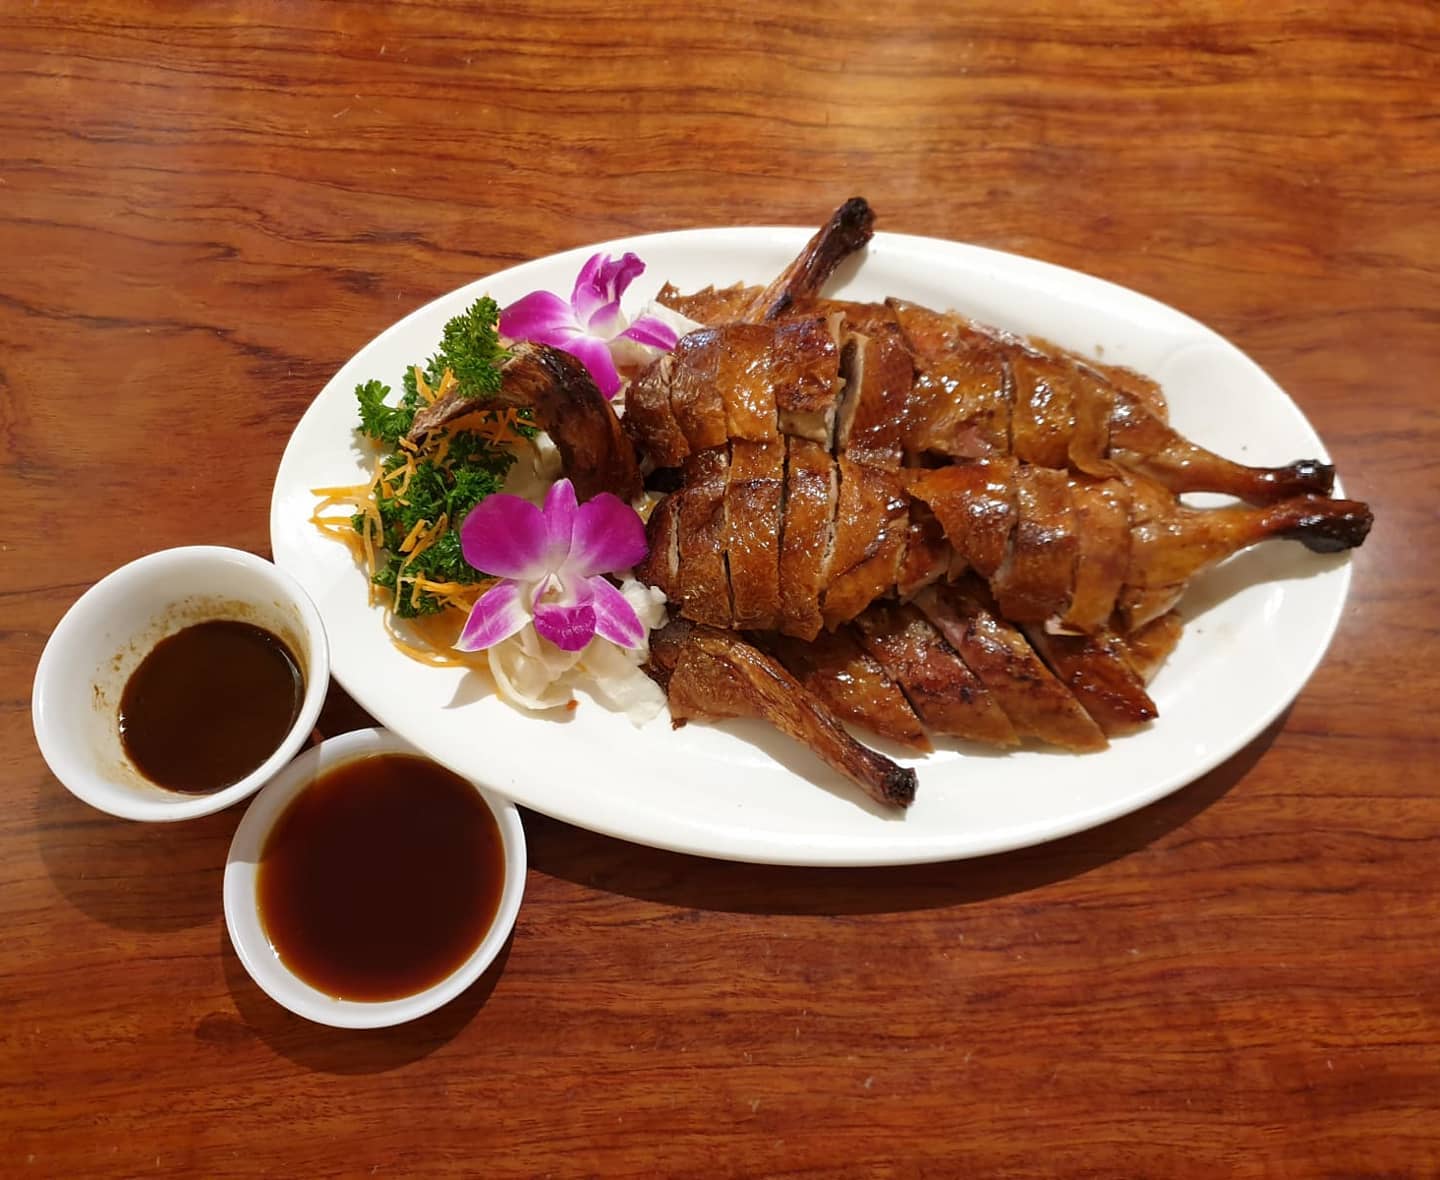 A platter of roast duck from Good Fortune Duck House